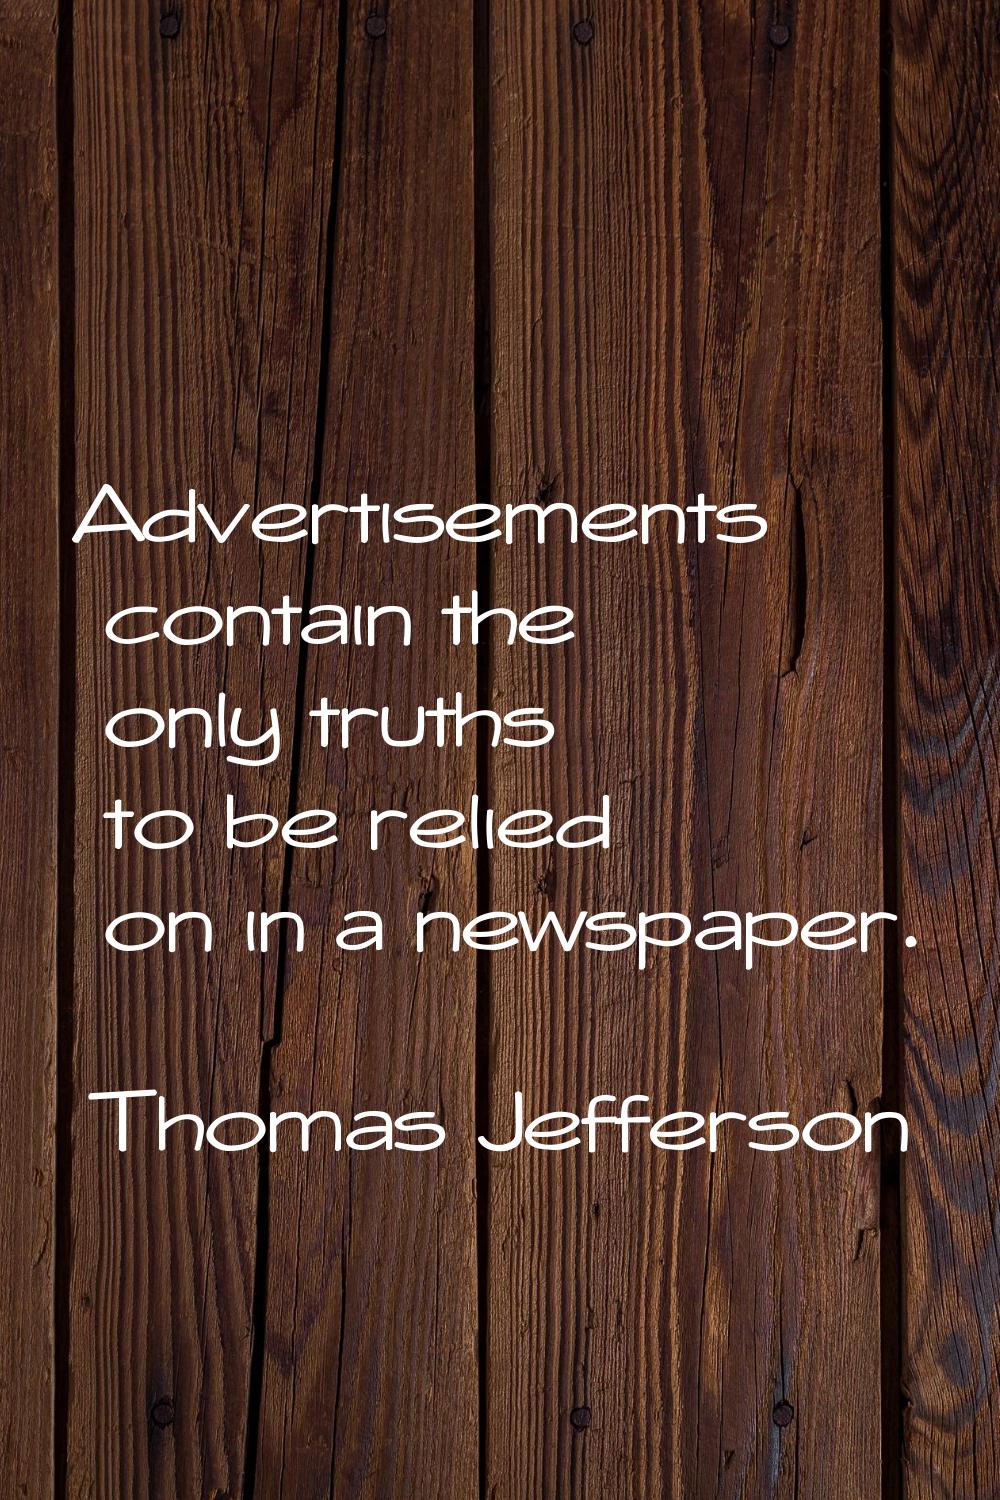 Advertisements contain the only truths to be relied on in a newspaper.